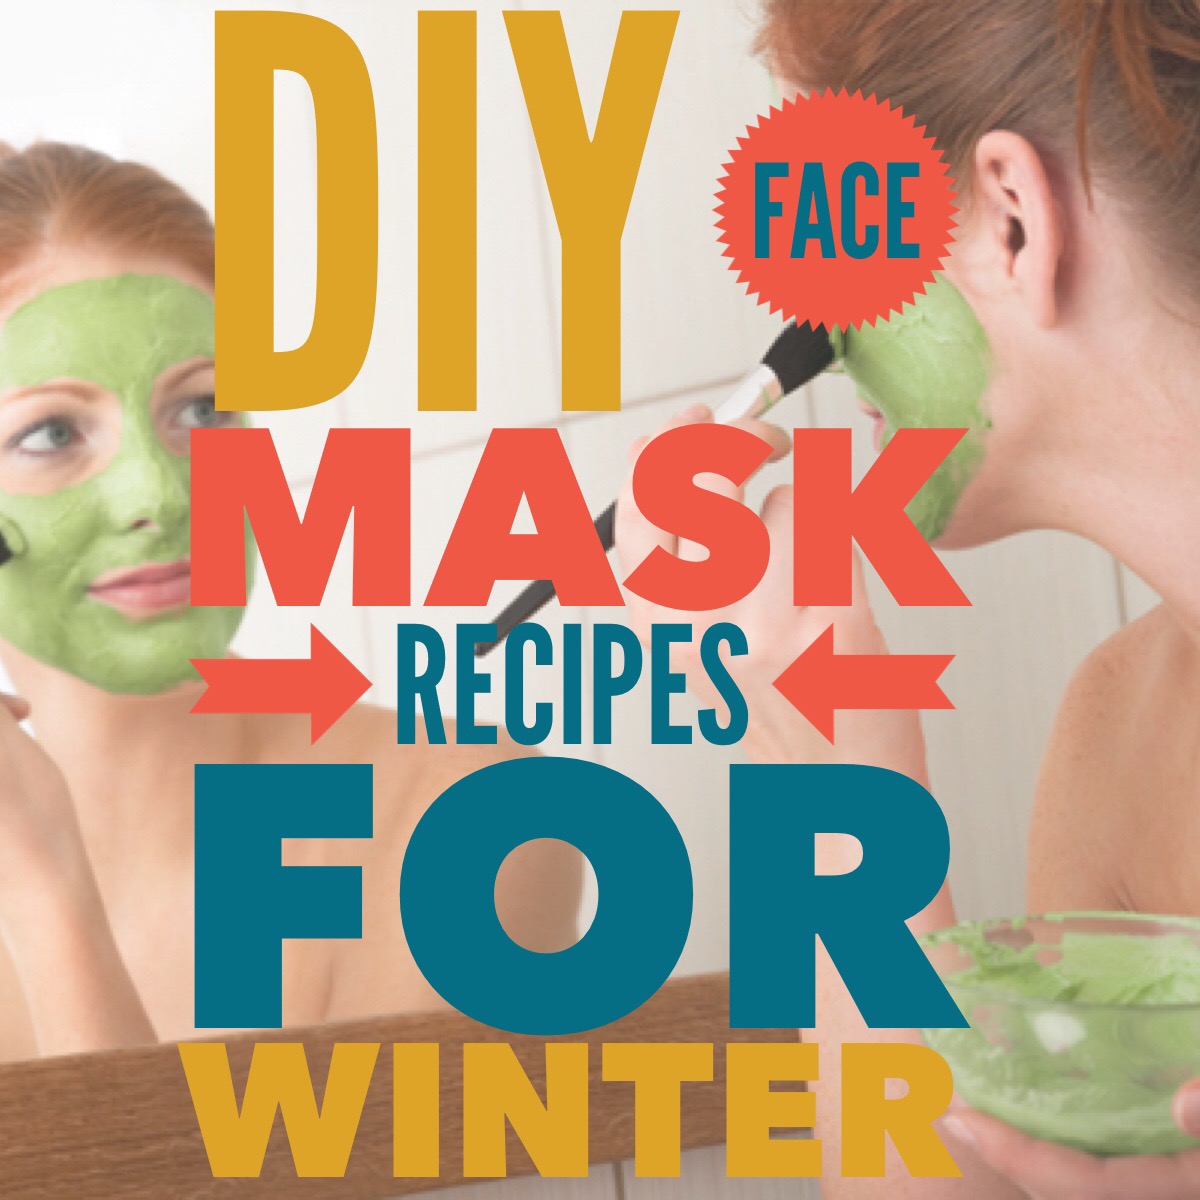 DIY AT Home Face Mask Recipes for the Winter